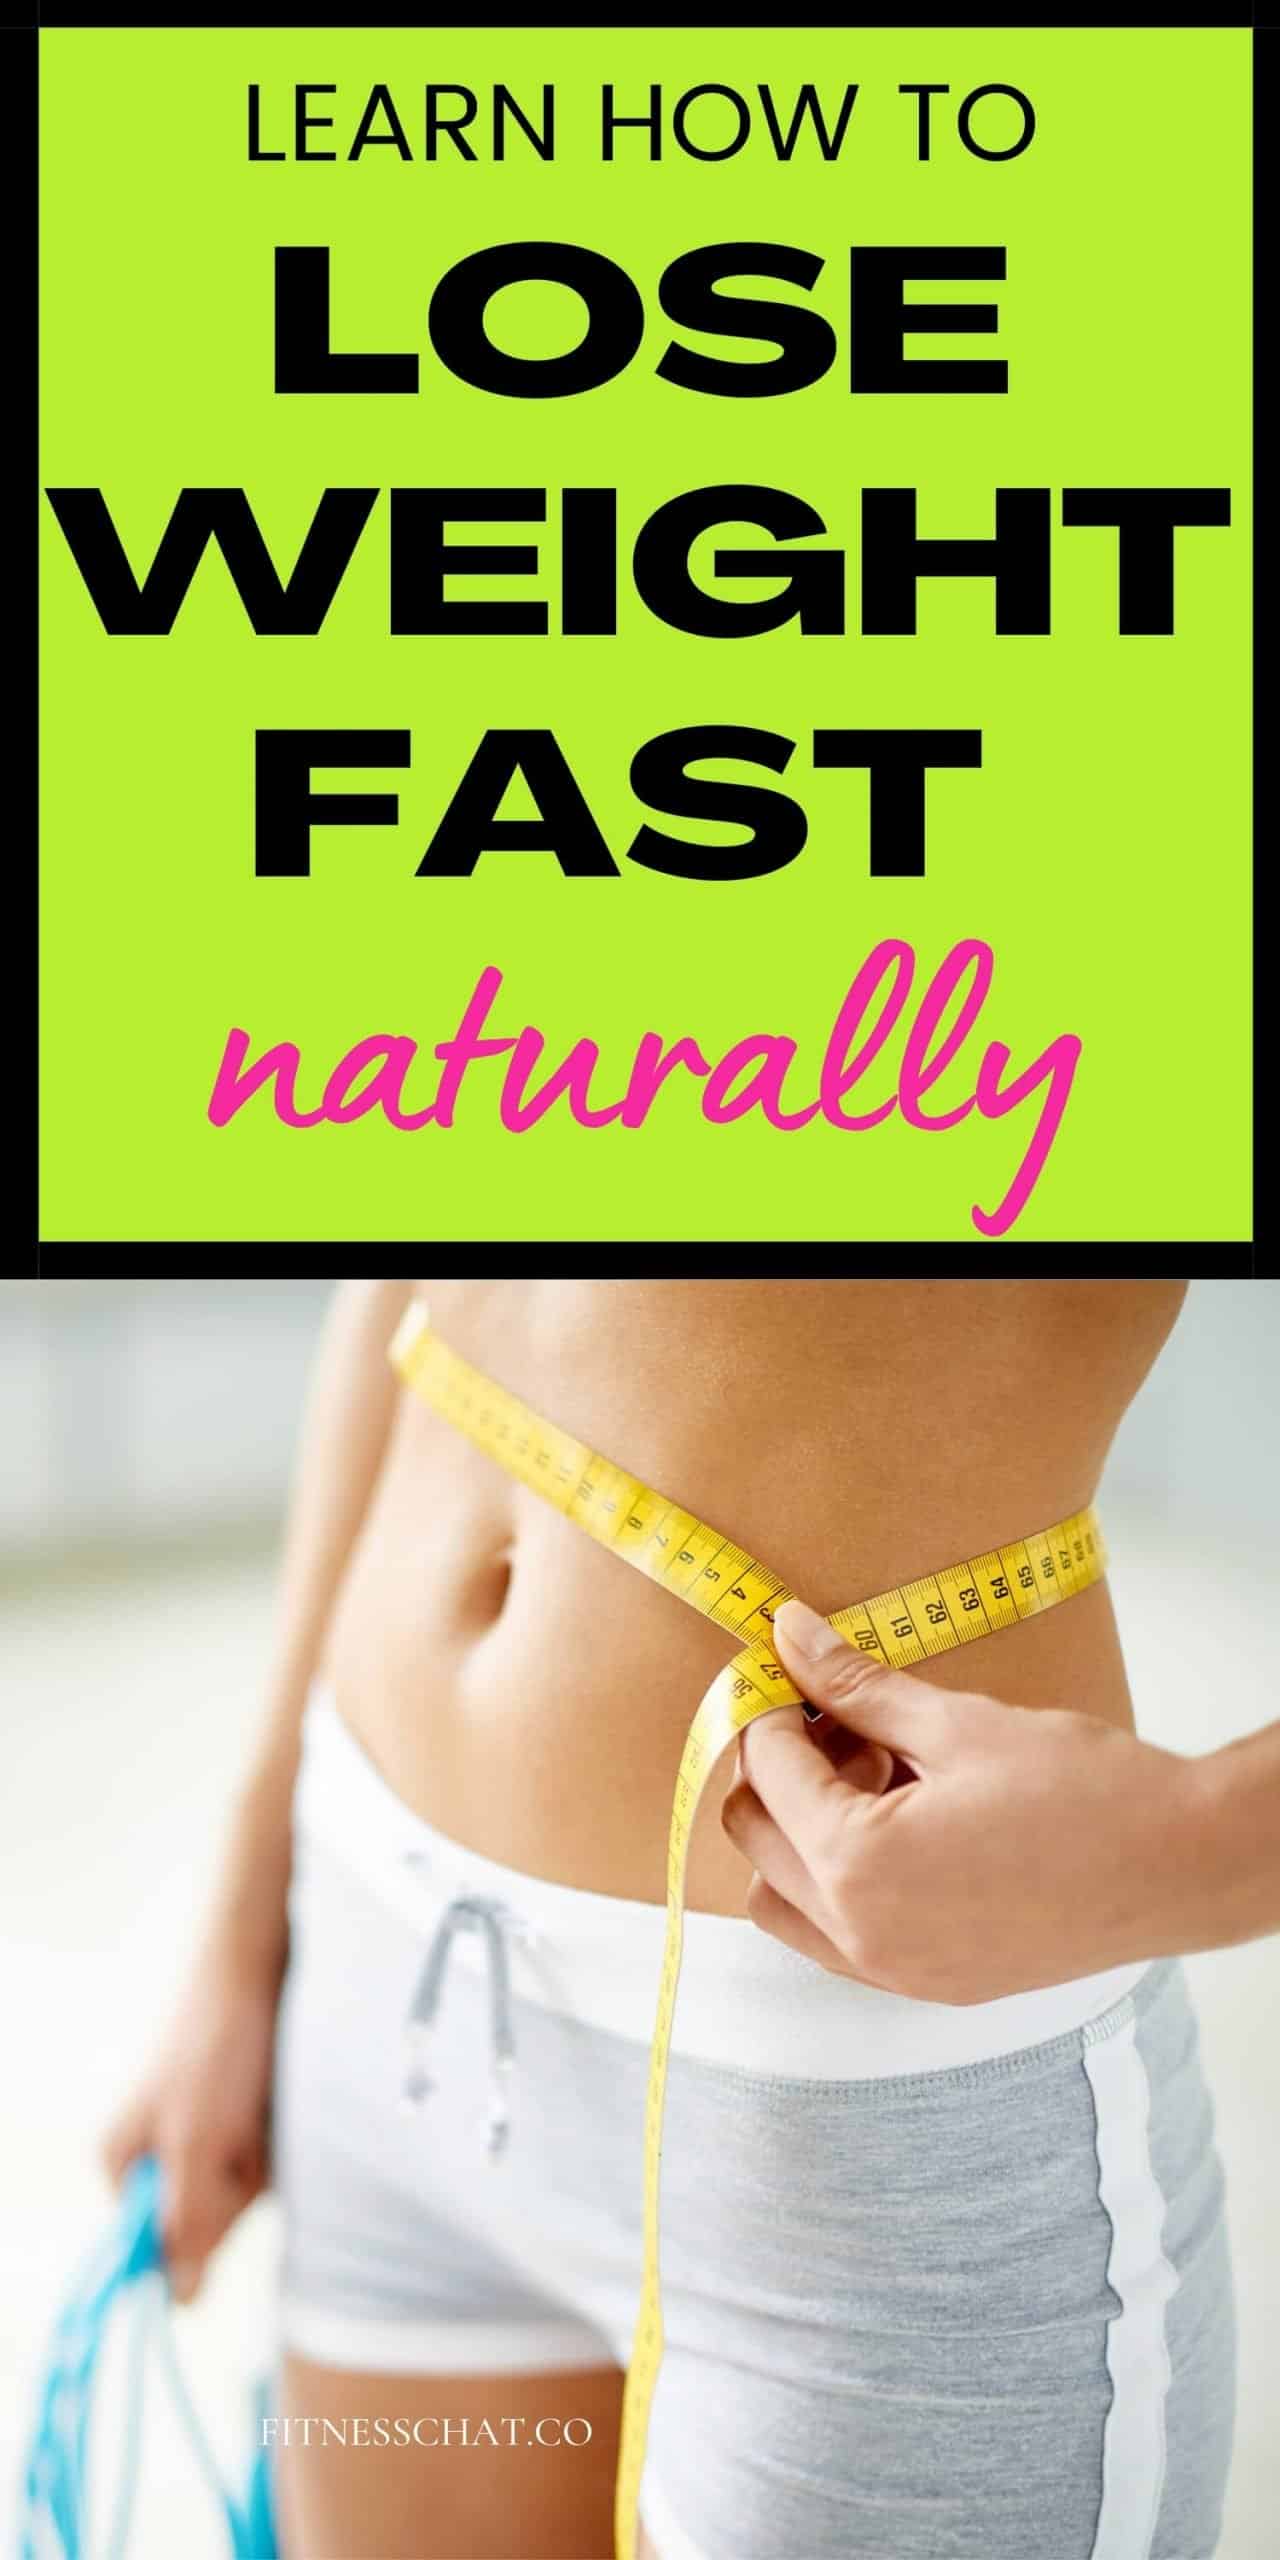 How to lose weight fast naturally and permanently in 12 easy steps